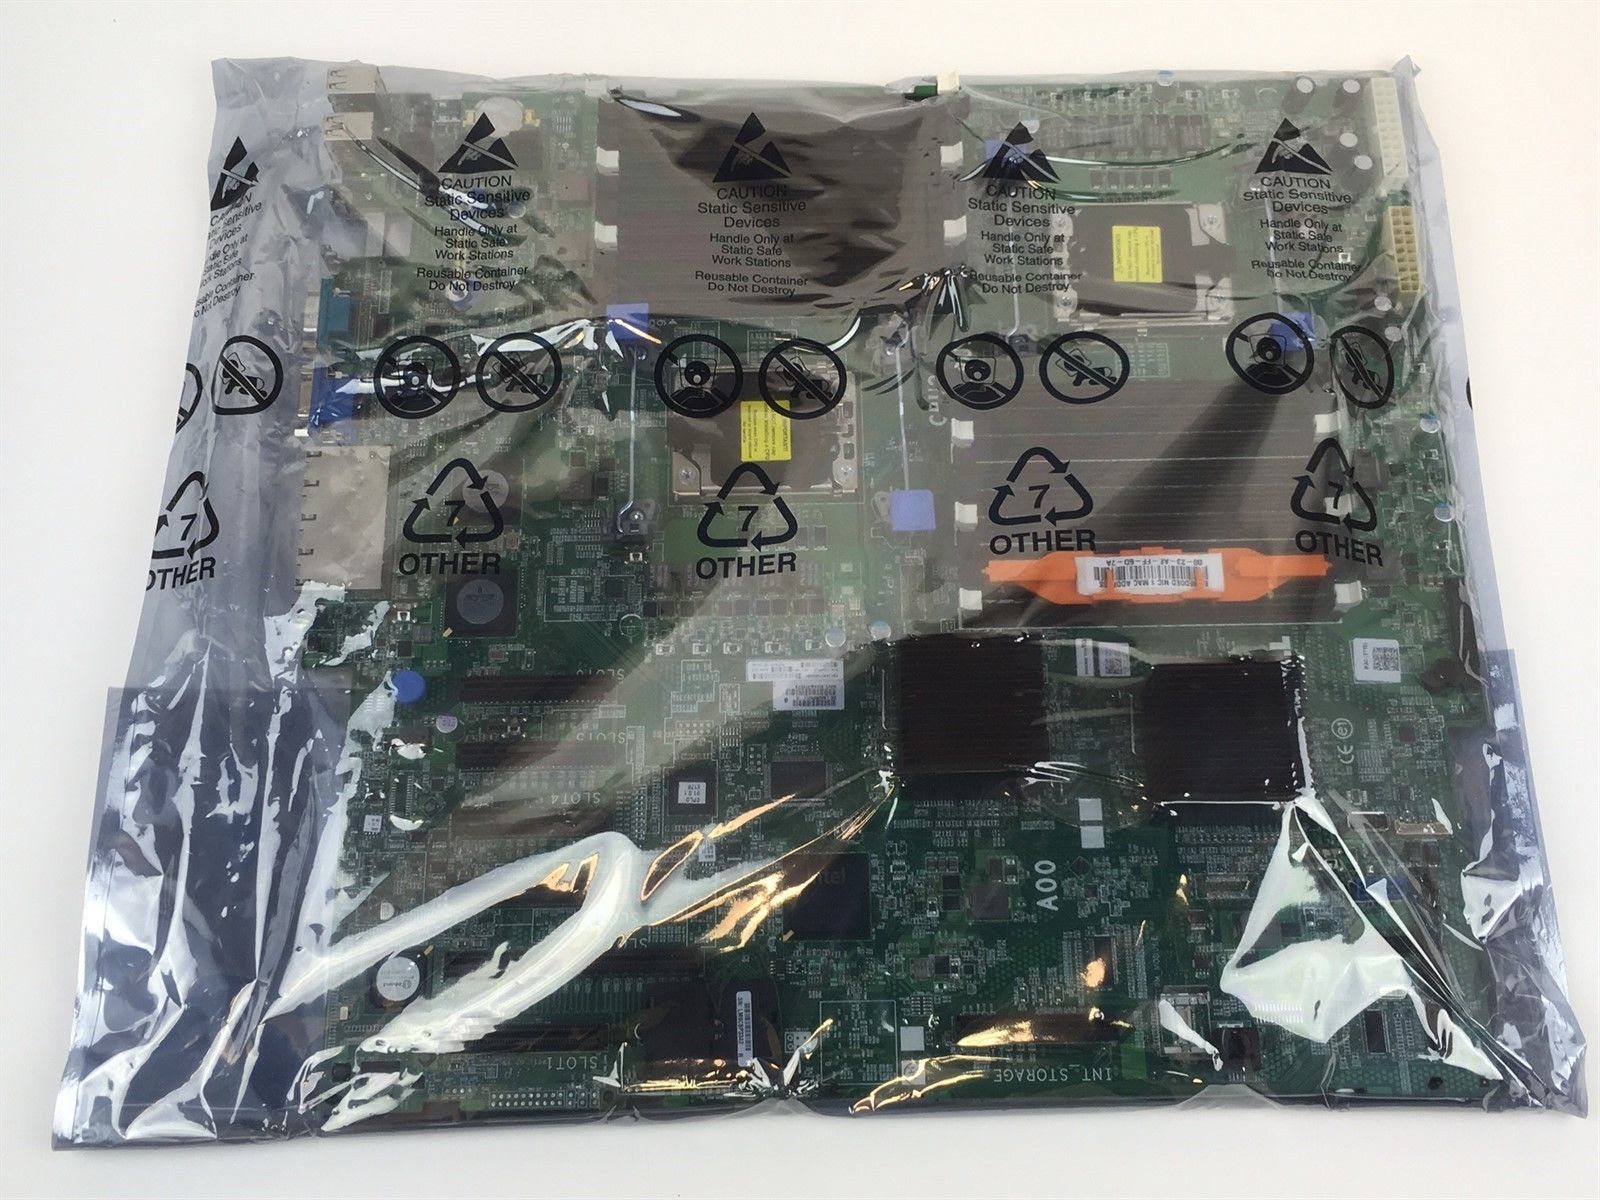 Dell PowerEdge T710 Server System Mainboard Motherboard HF0XM 0HF0XM